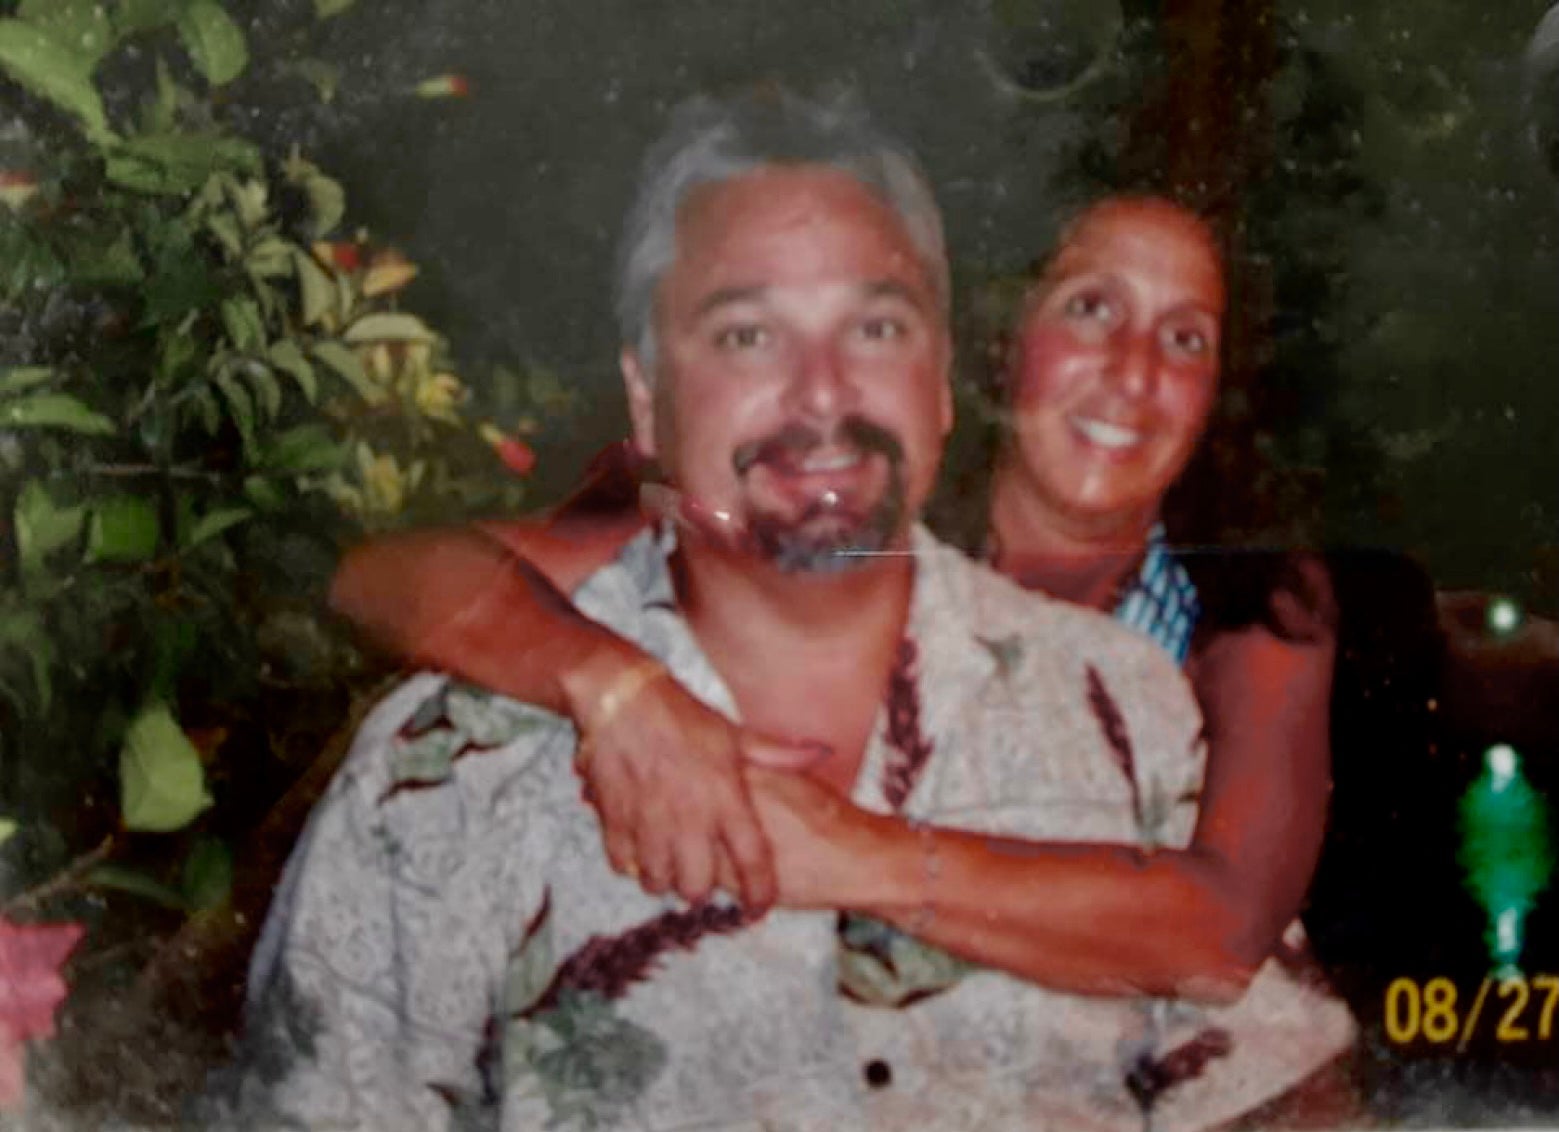 Michele Preissler lost her husband, Daryl, to Covid-19 in May 2021